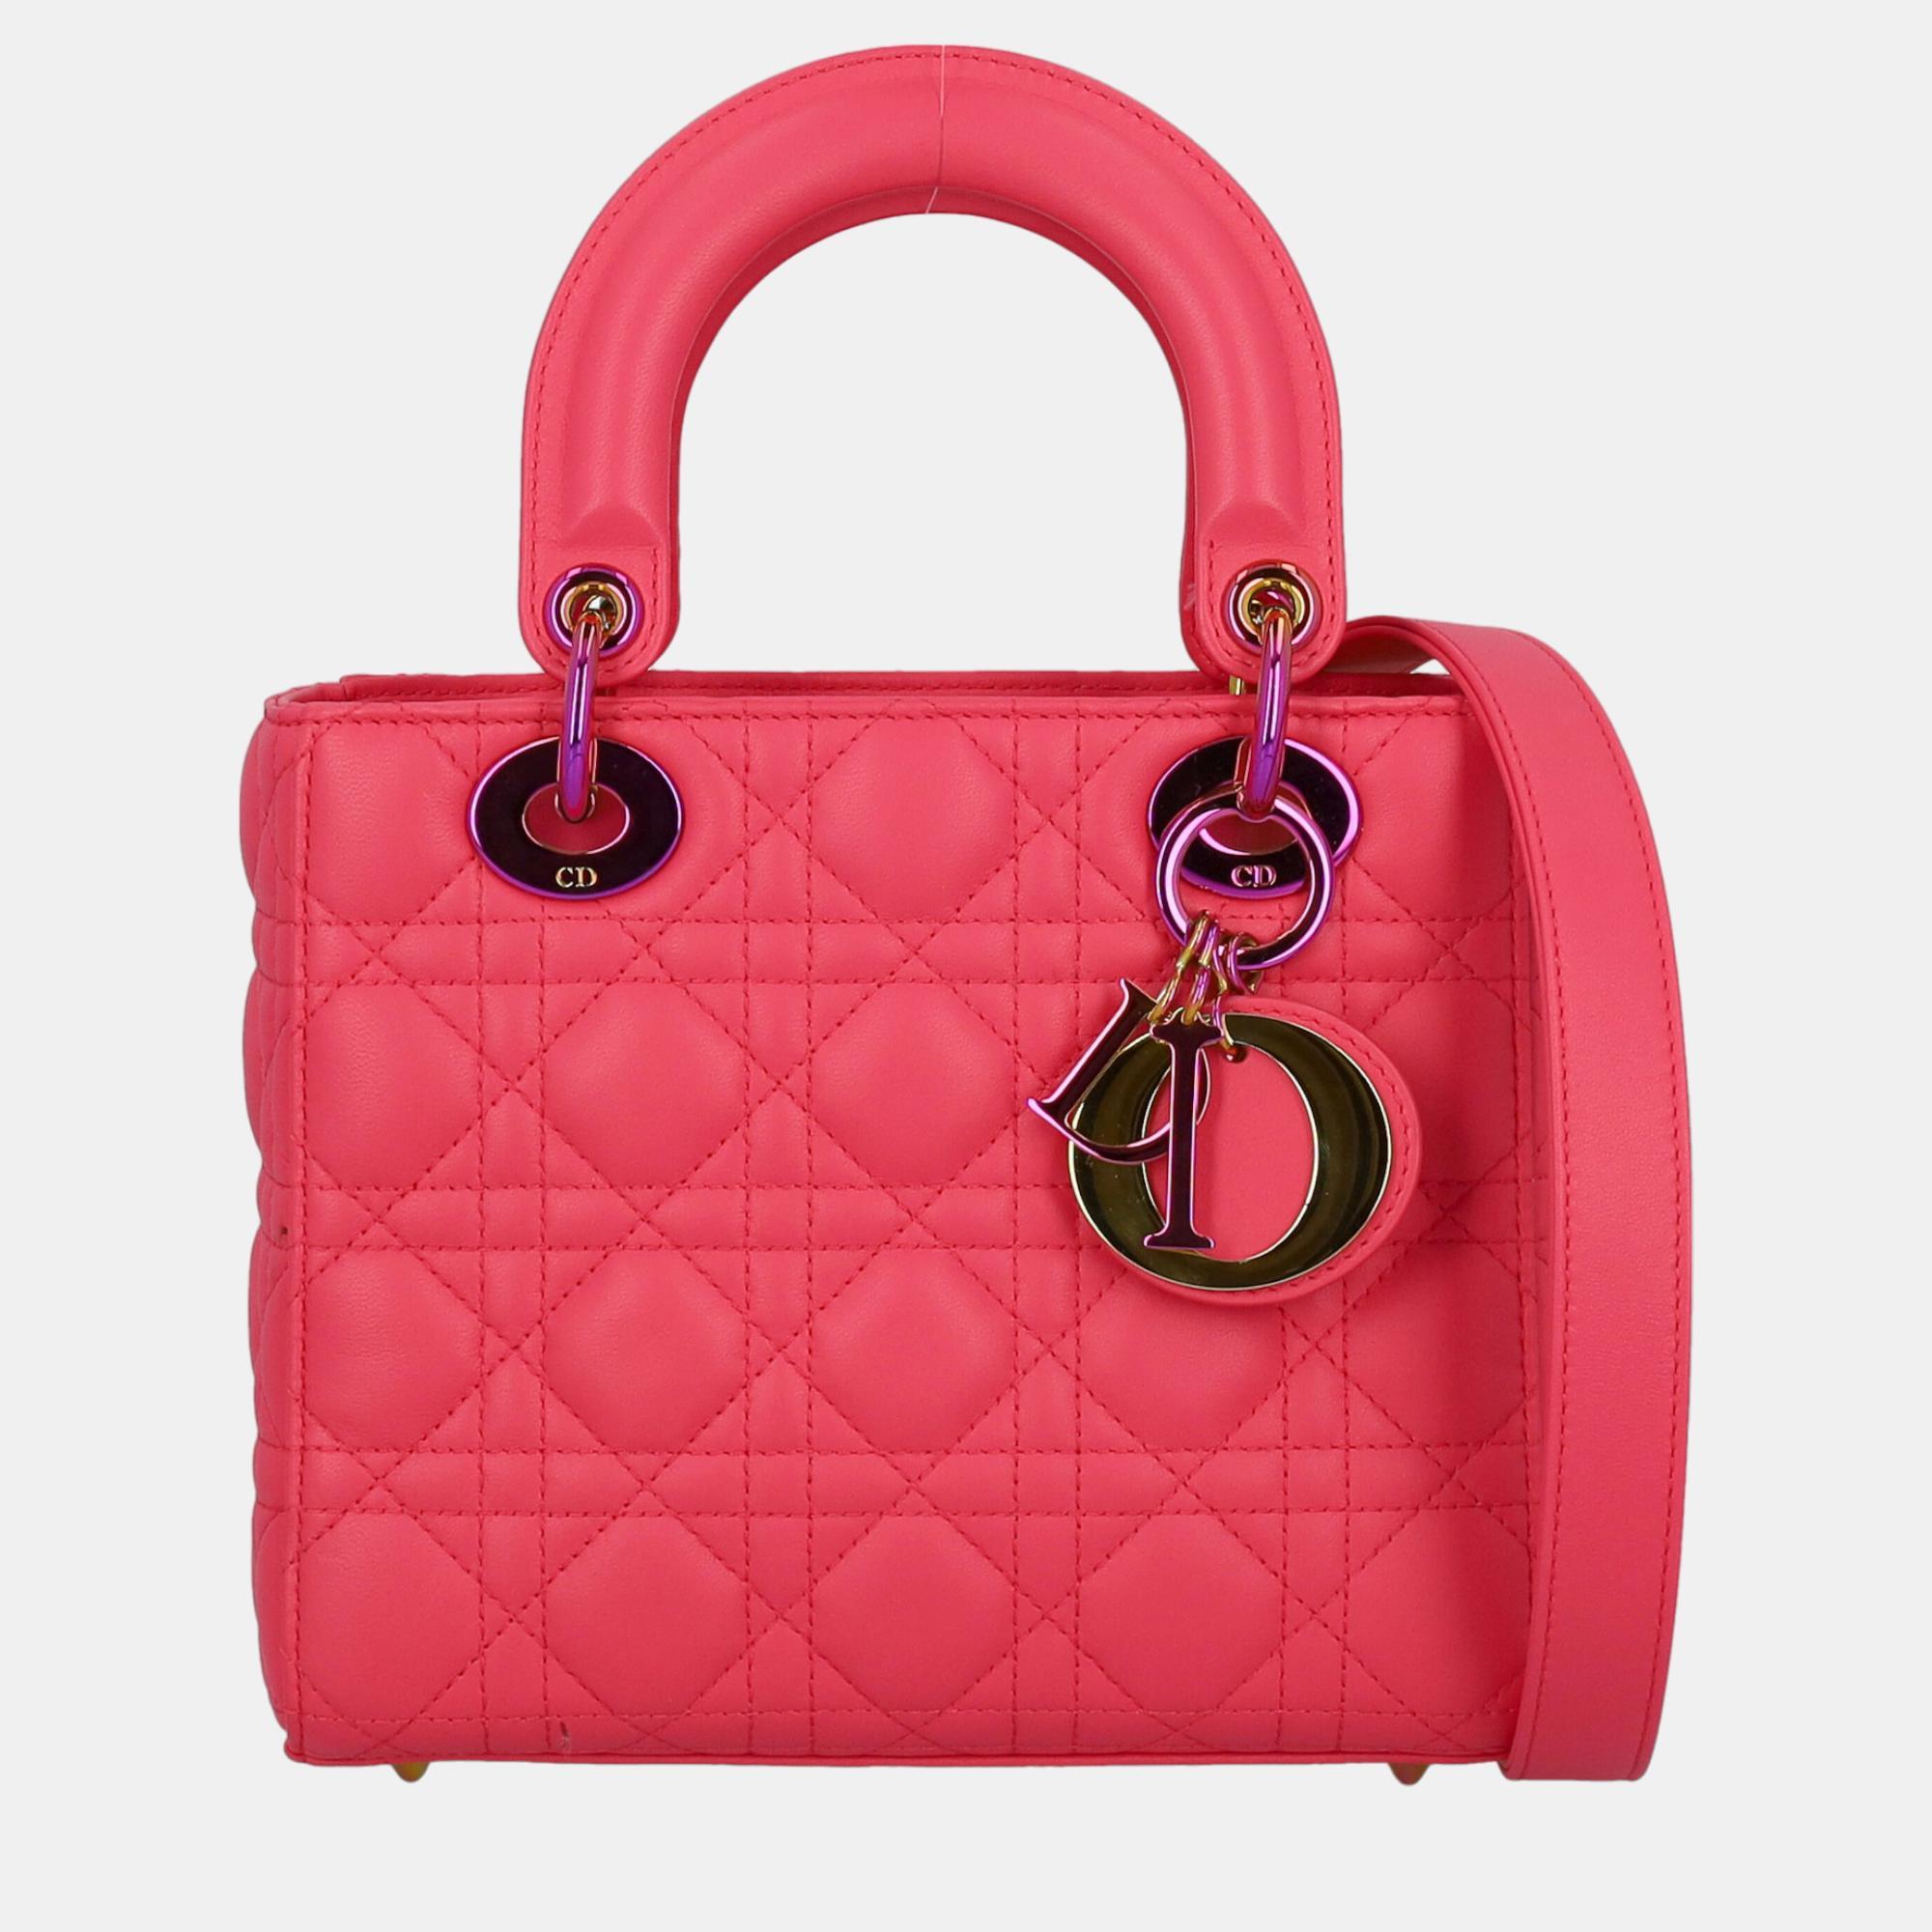 Dior Lady Dior - Women's Leather Tote Bag - Pink - One Size